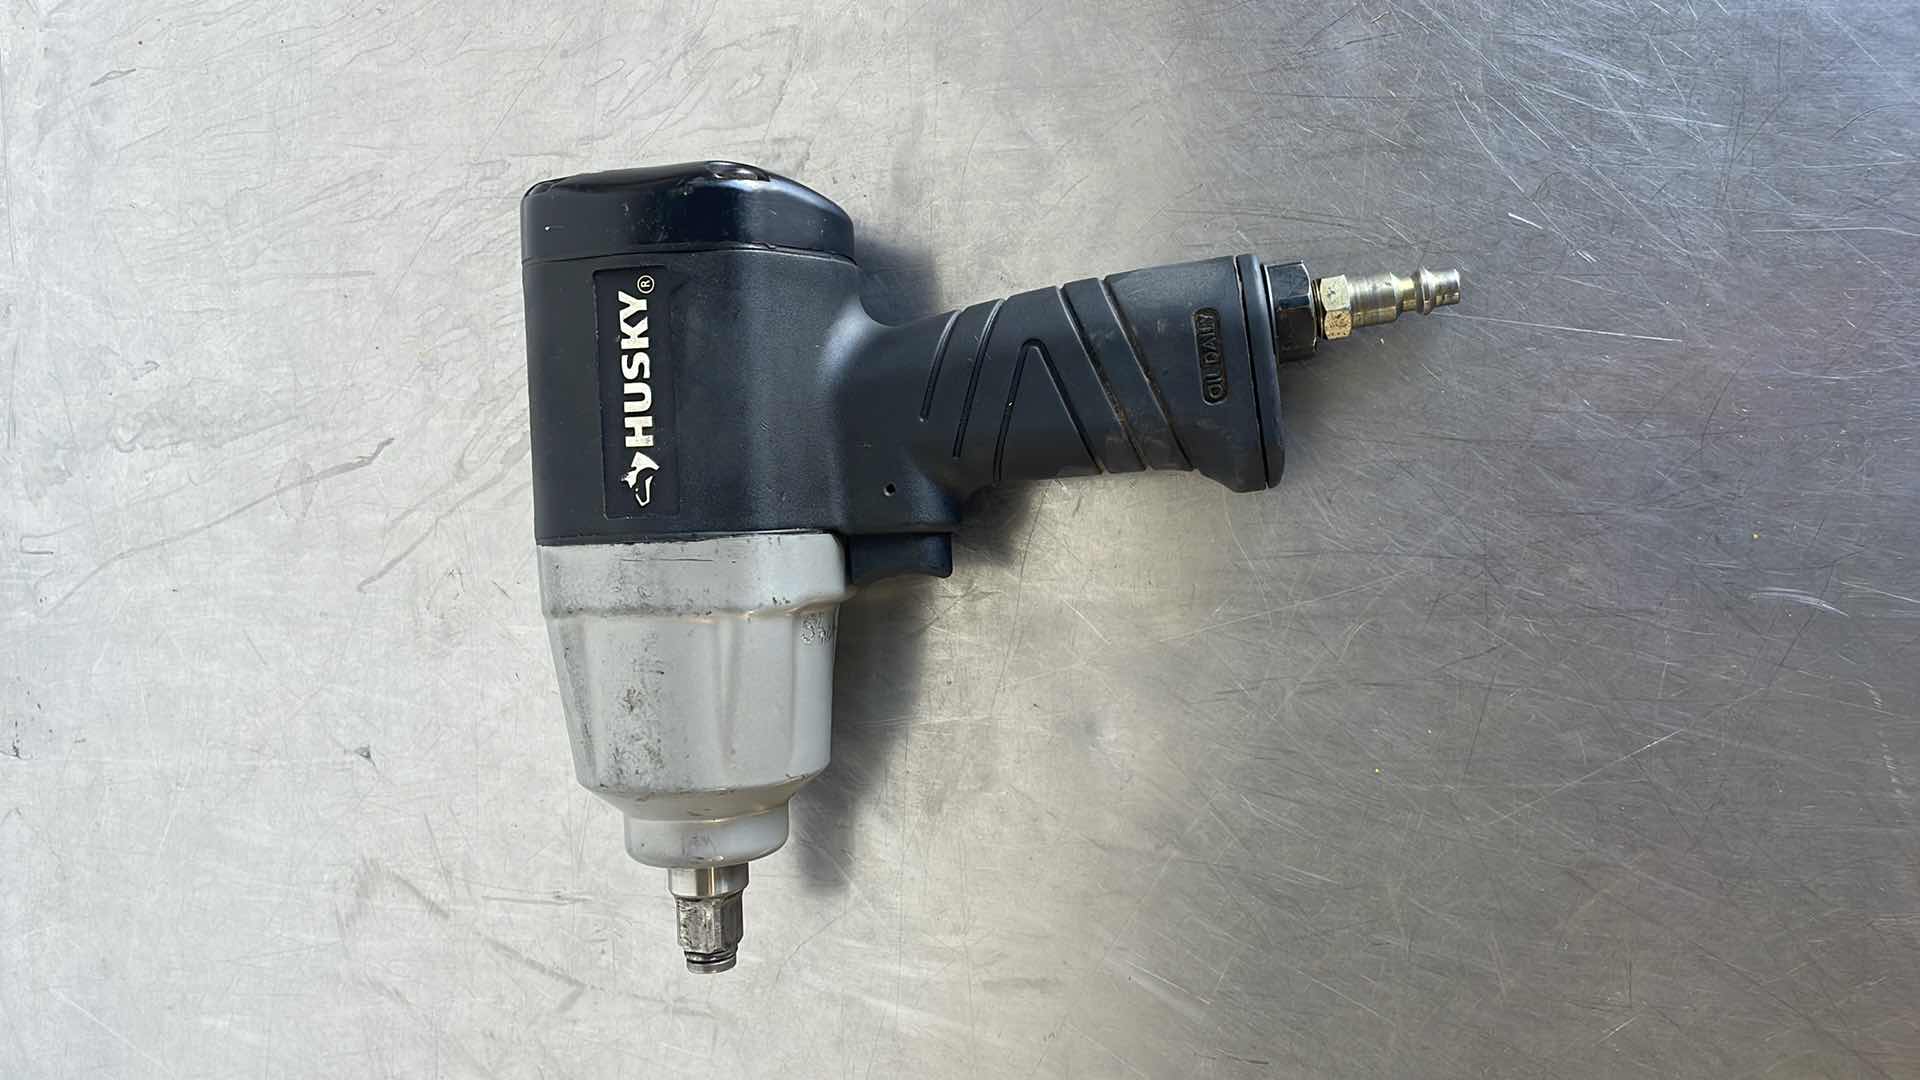 Photo 2 of HUSKY 1/2” IMPACT WRENCH MODEL H4455